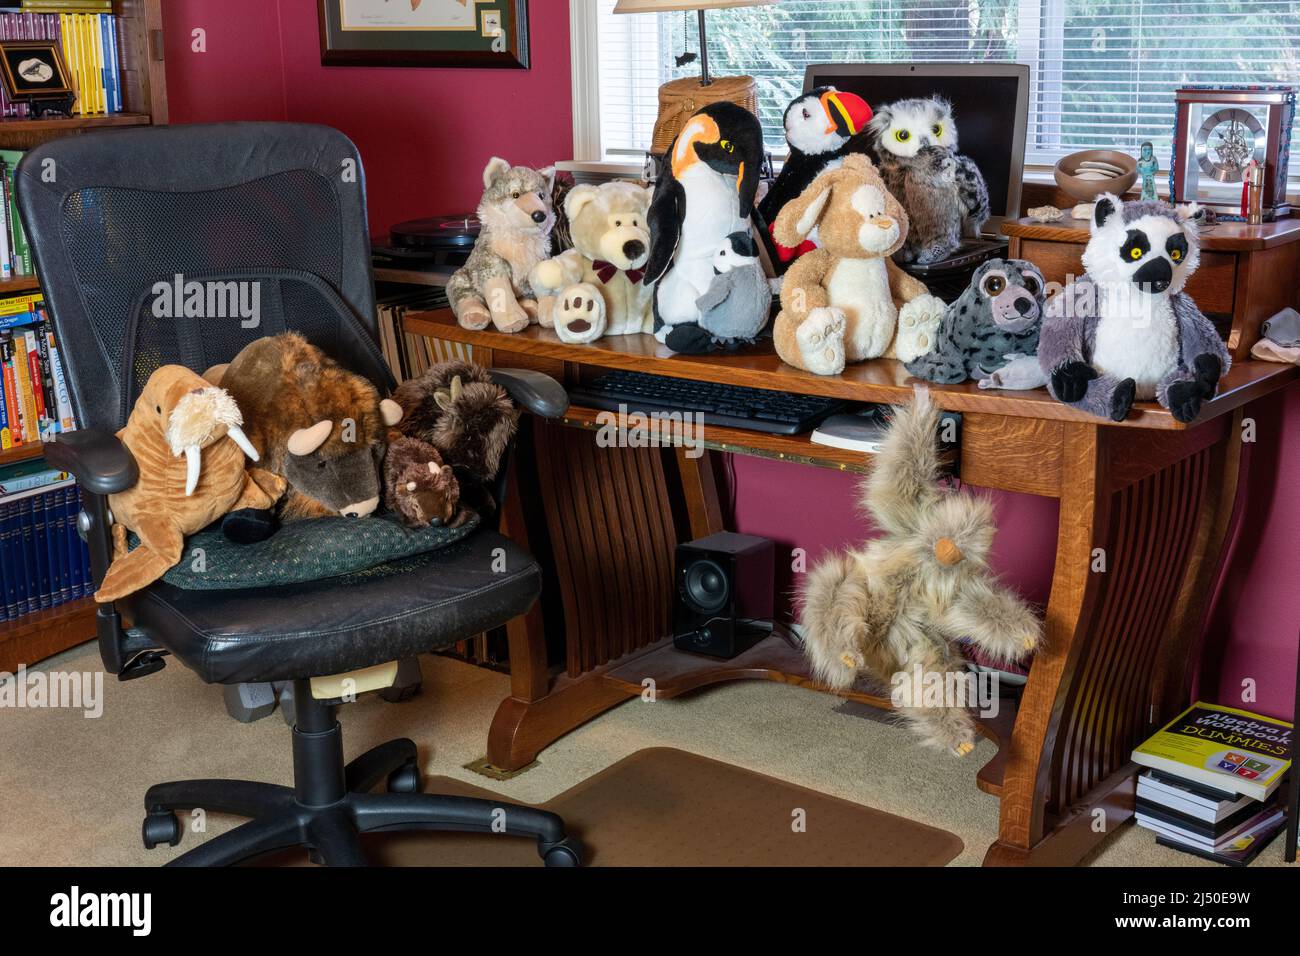 Stuffed animals taking over an office chair and desk Stock Photo